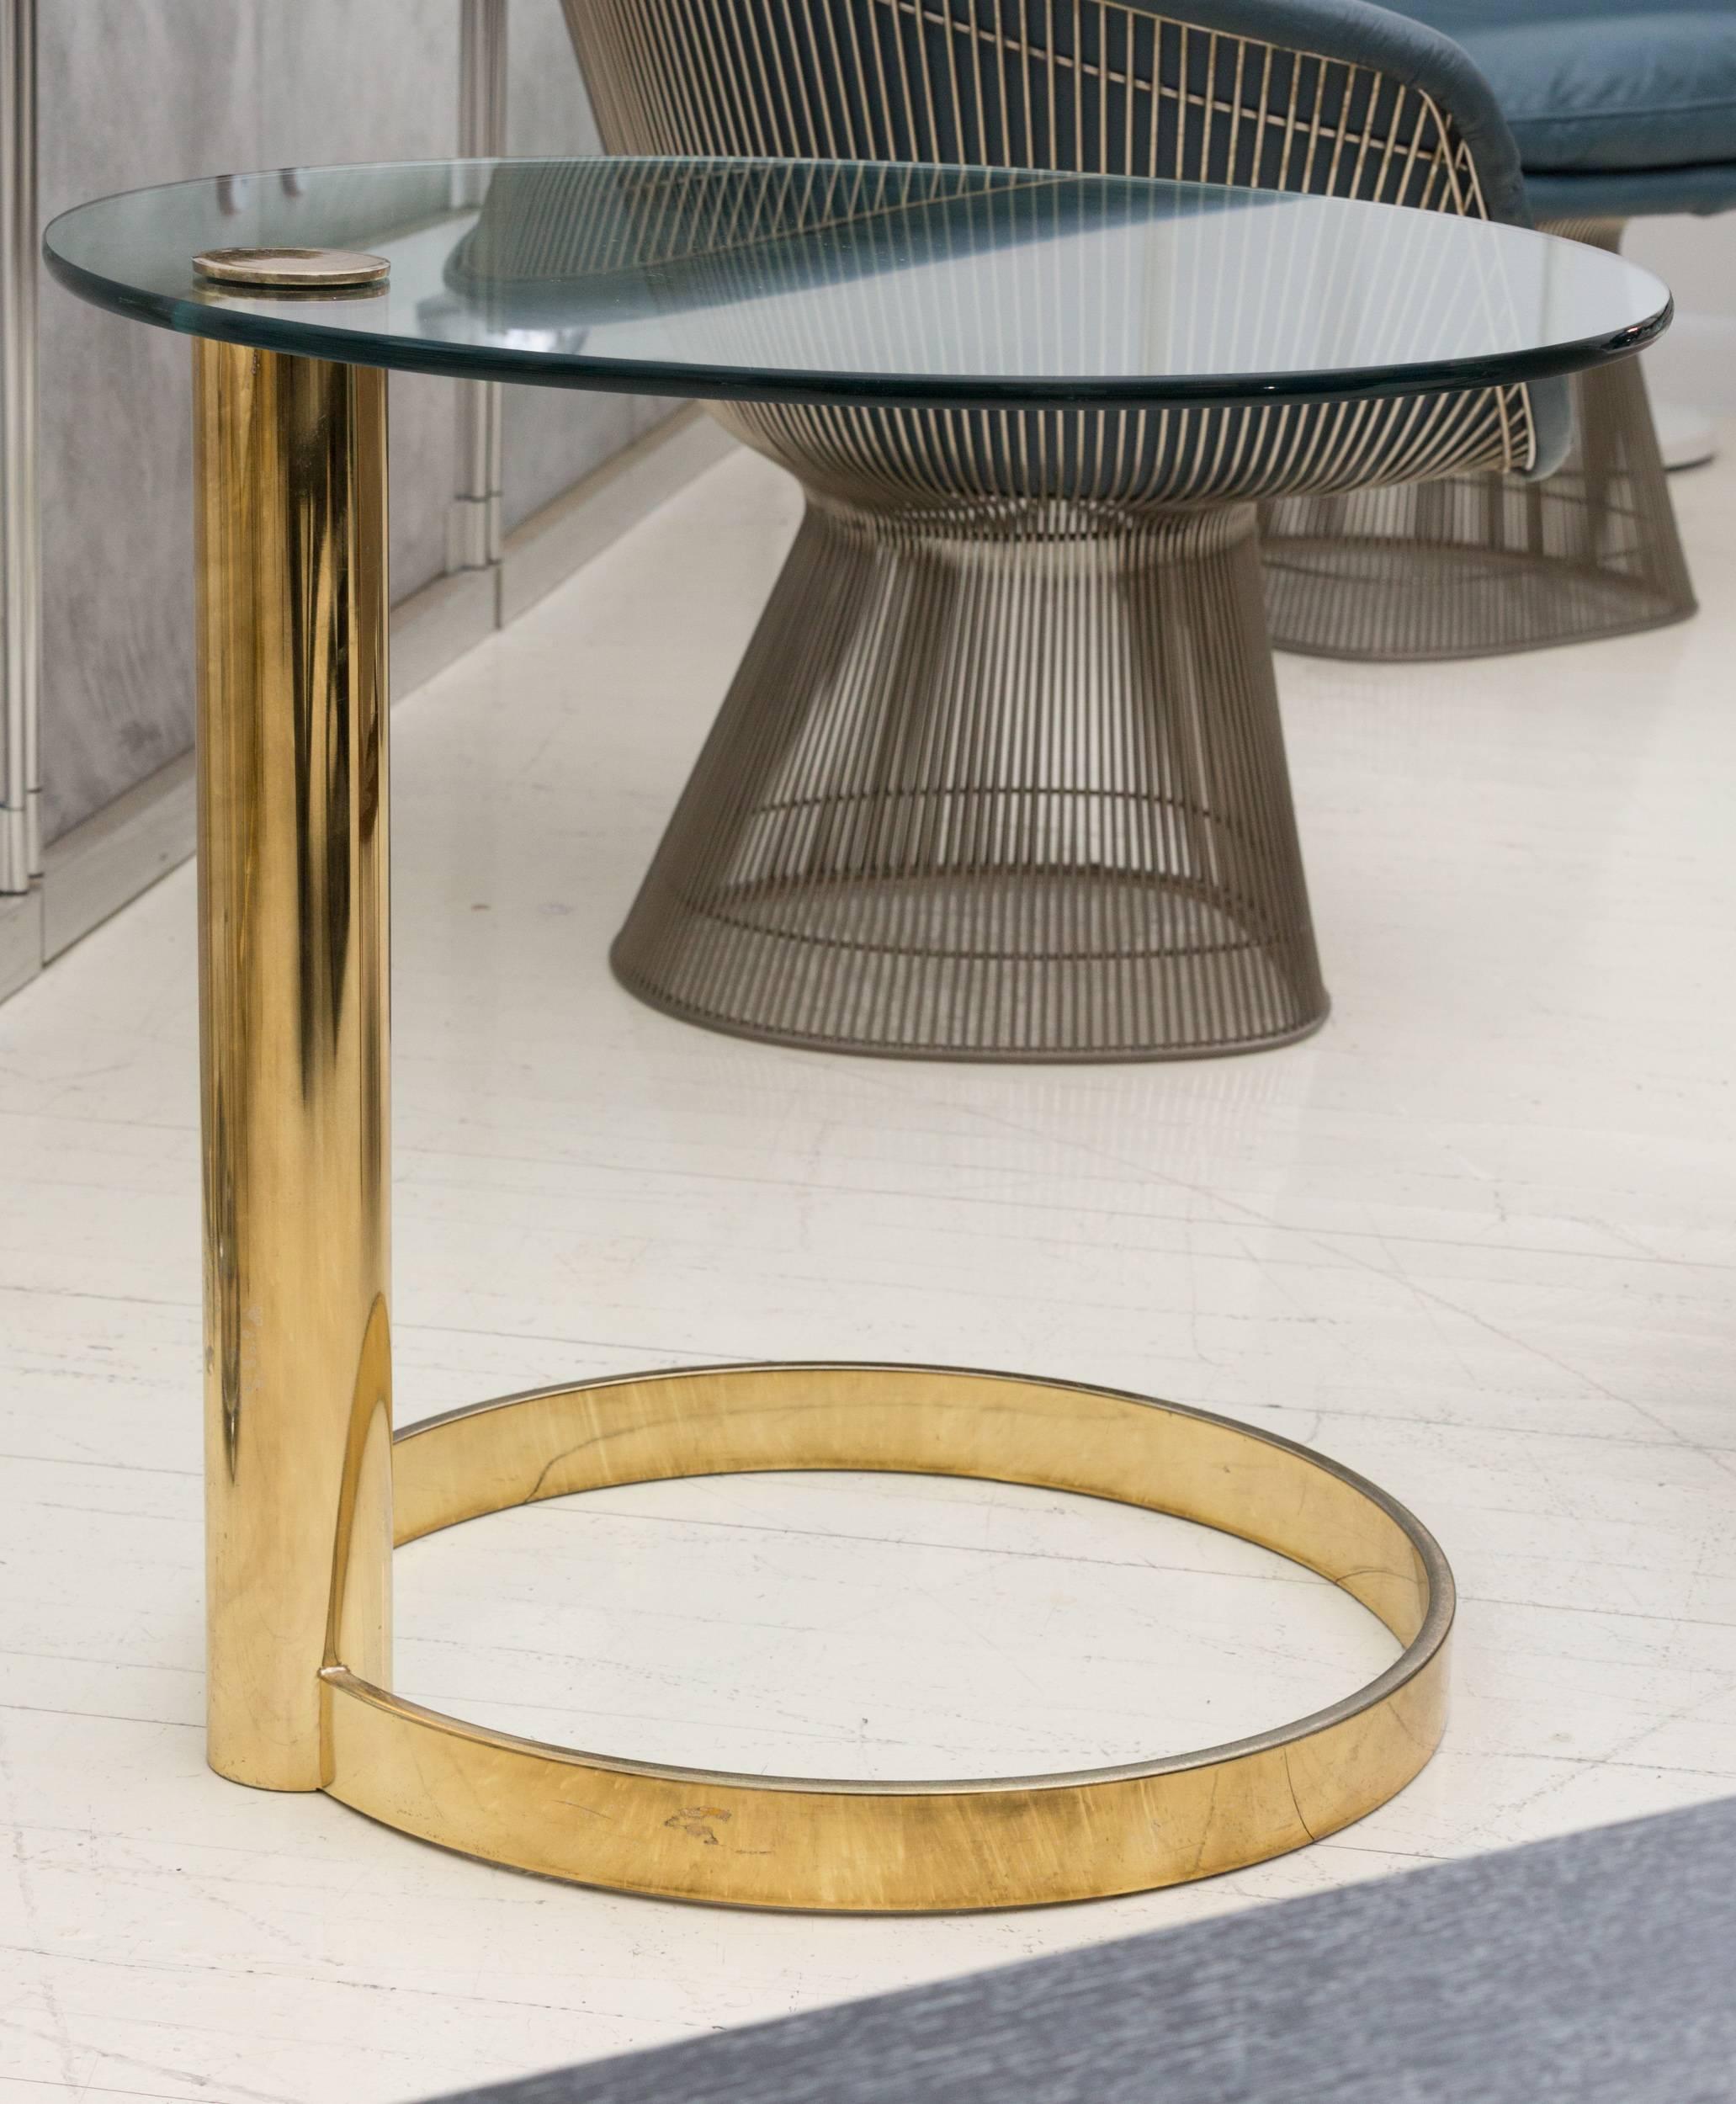 Brass and glass Side Table by Pace Collection.
26.5" diameter, 0.5" thick glass top cantilevered 
from a 3" diameter brass post on 20" diameter 
2" H, 0.5" thick ring base. 
Some patina to the polished brass finish.